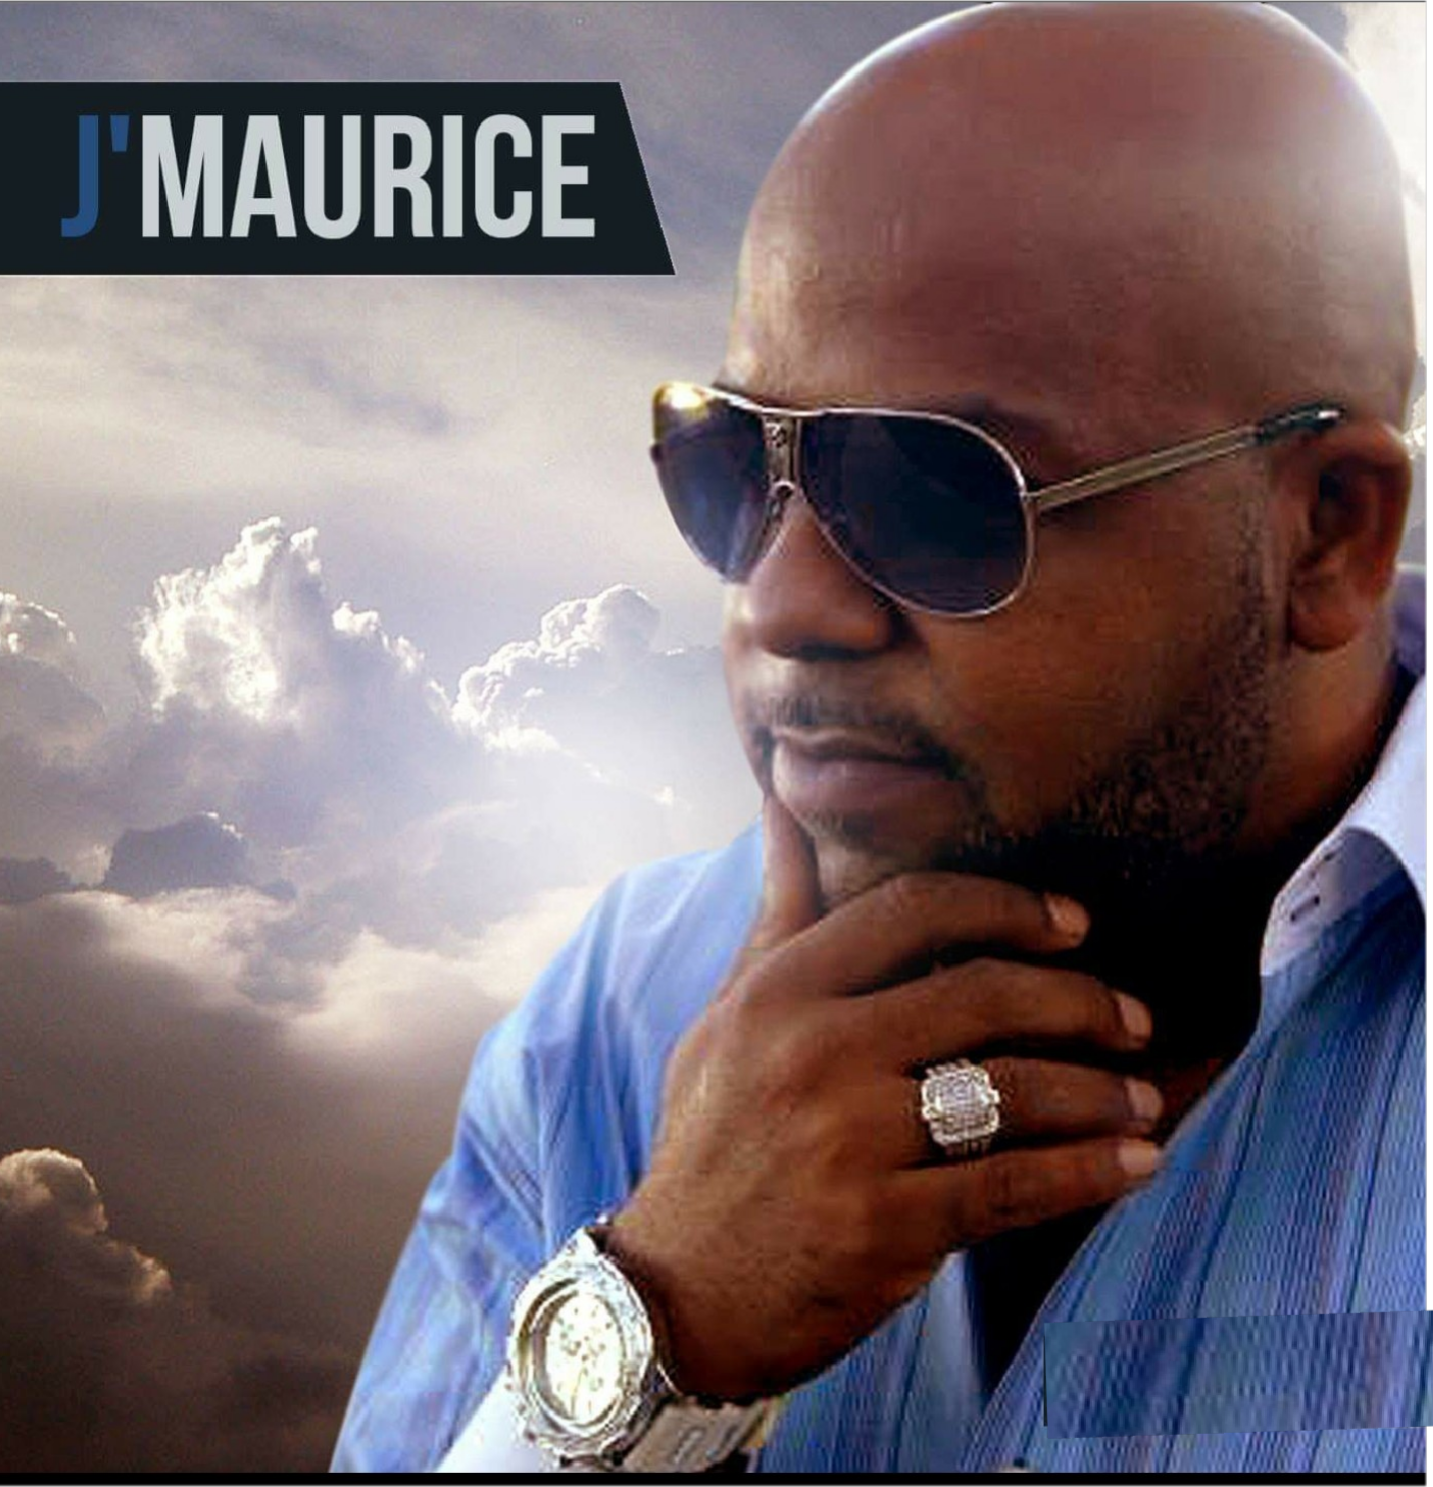 ‘ J.Maurice’ drops a new indescribably charismatic anthem titled “Beautiful”